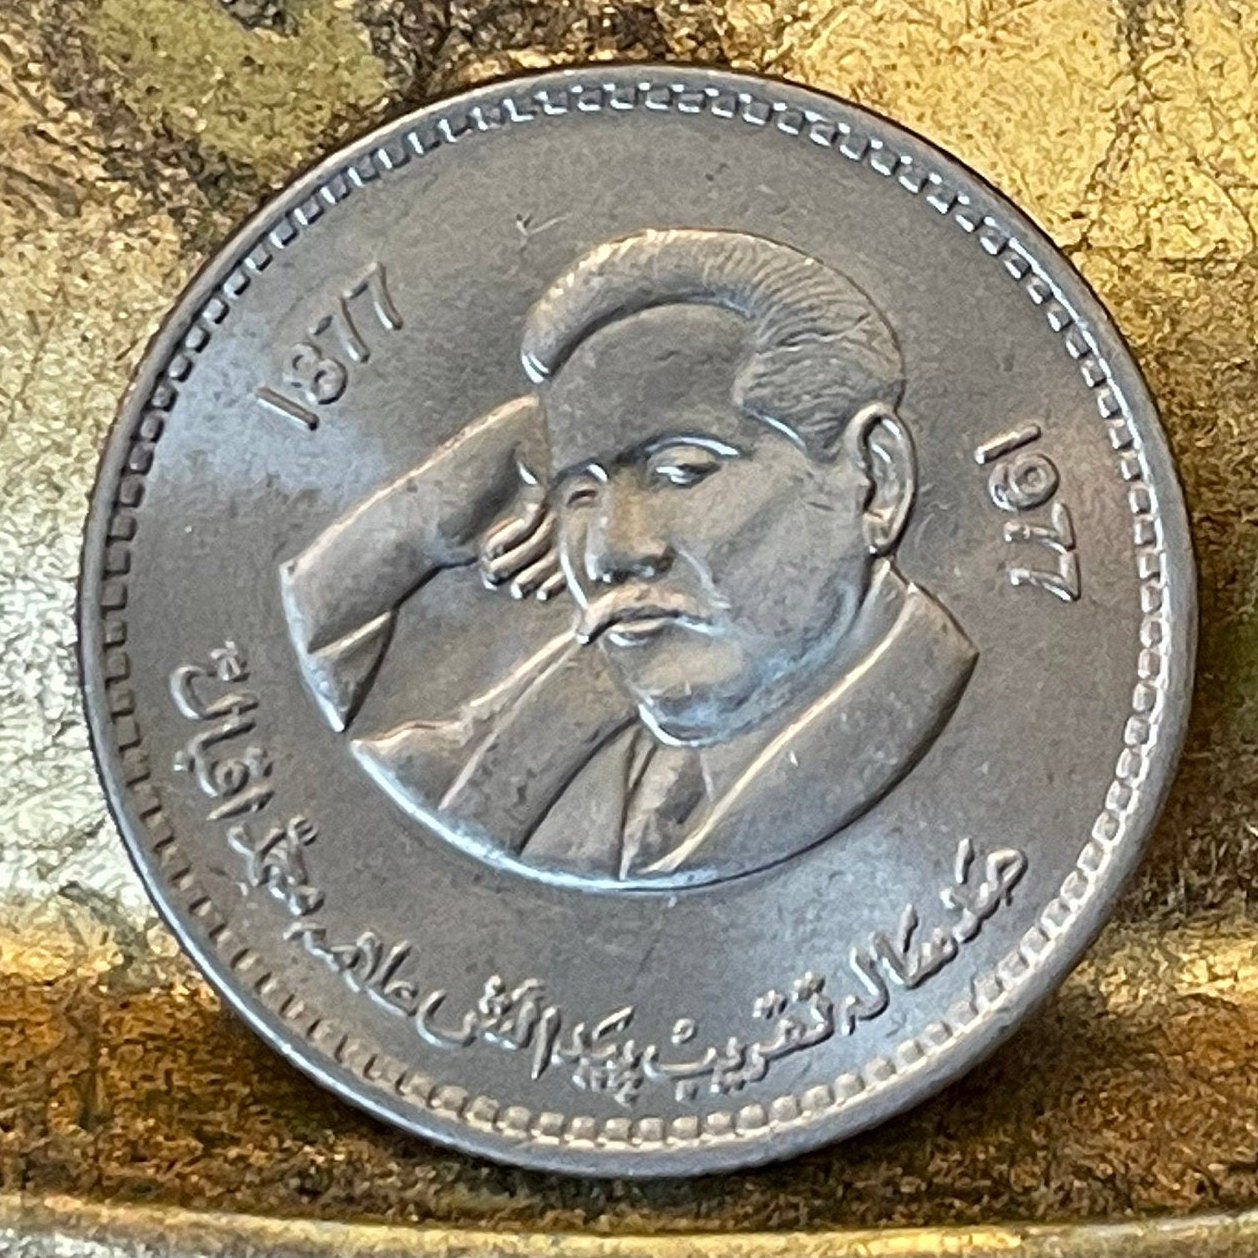 Allama Muhammad Iqbal 1 Rupee Pakistan Authentic Coin Money for Jewelry and Craft Making (1977) (Urdu Poetry)